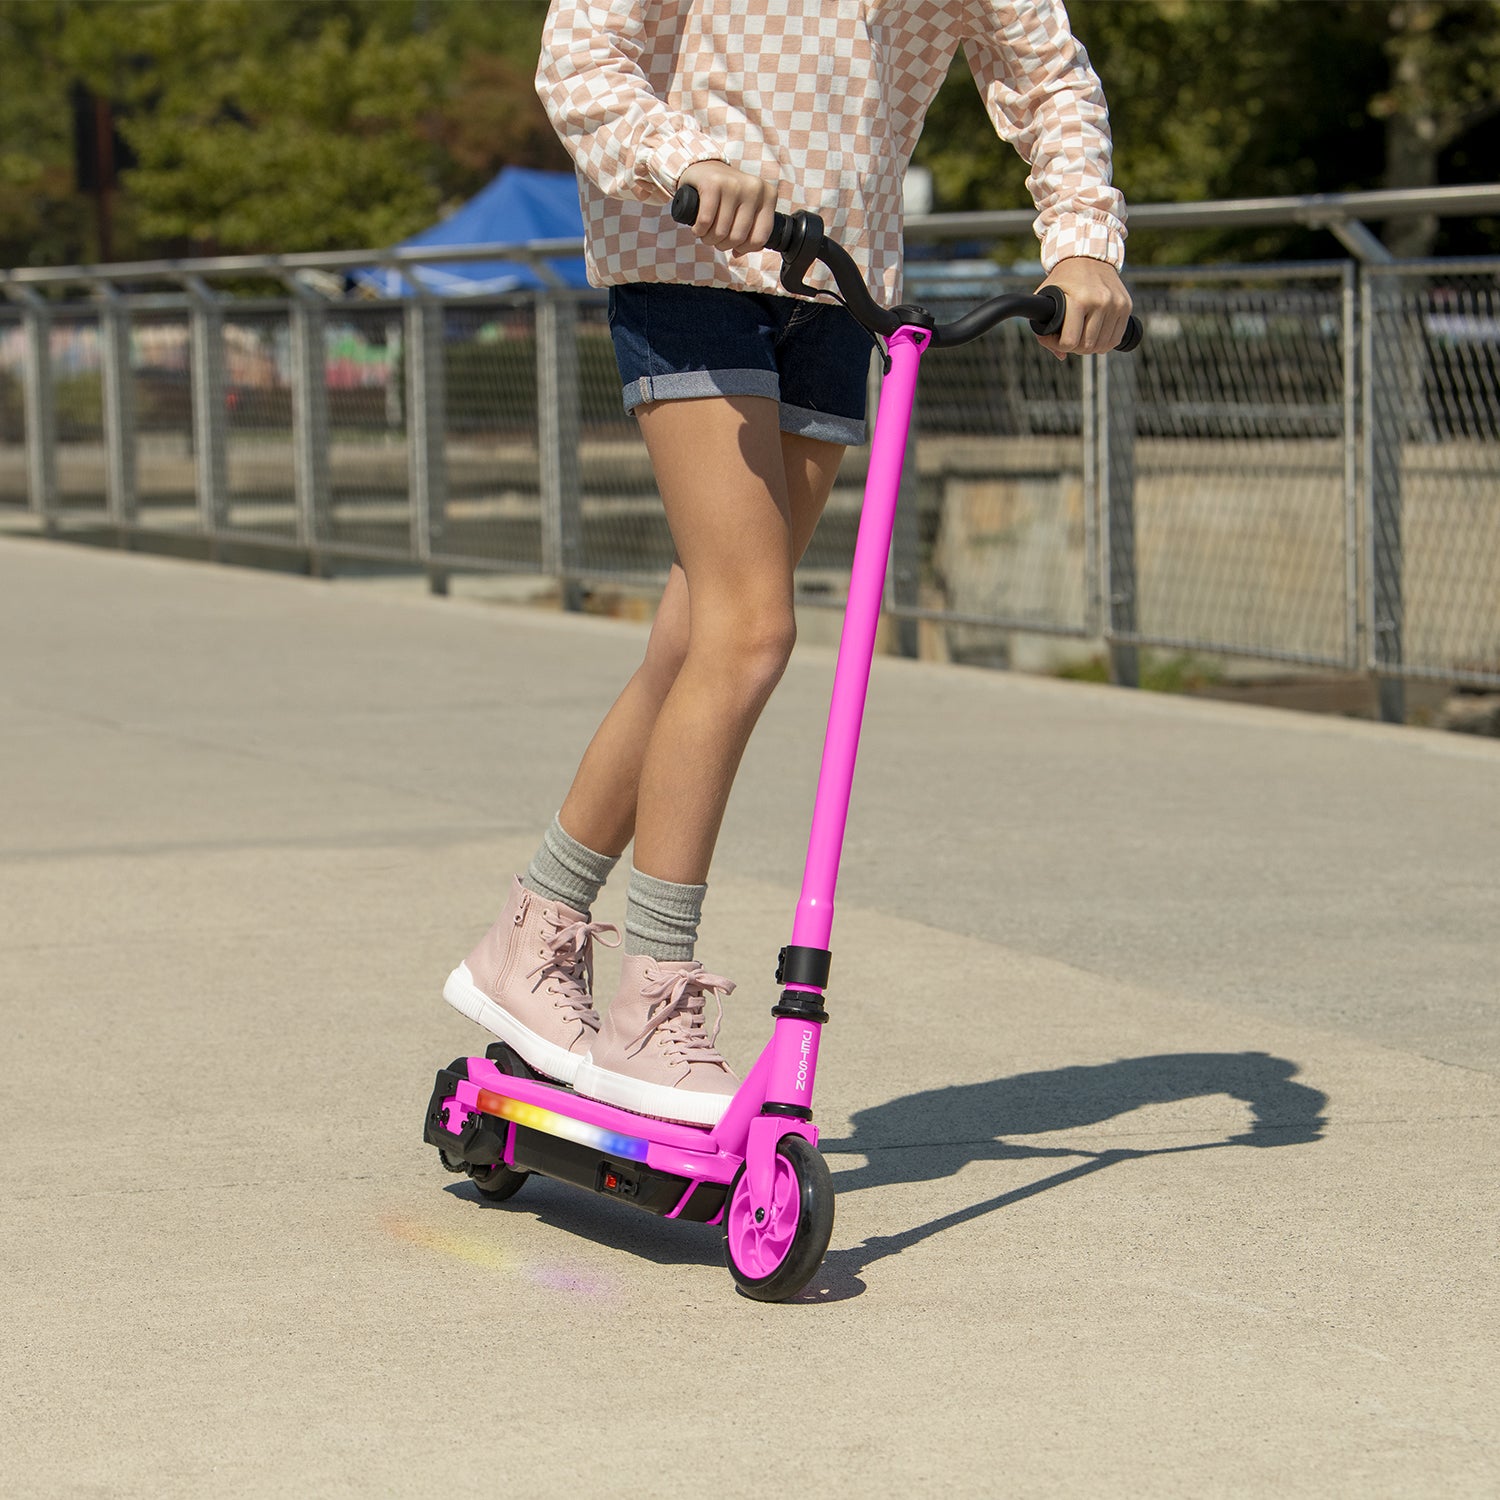 close up of kid riding pink echo x electric scooter